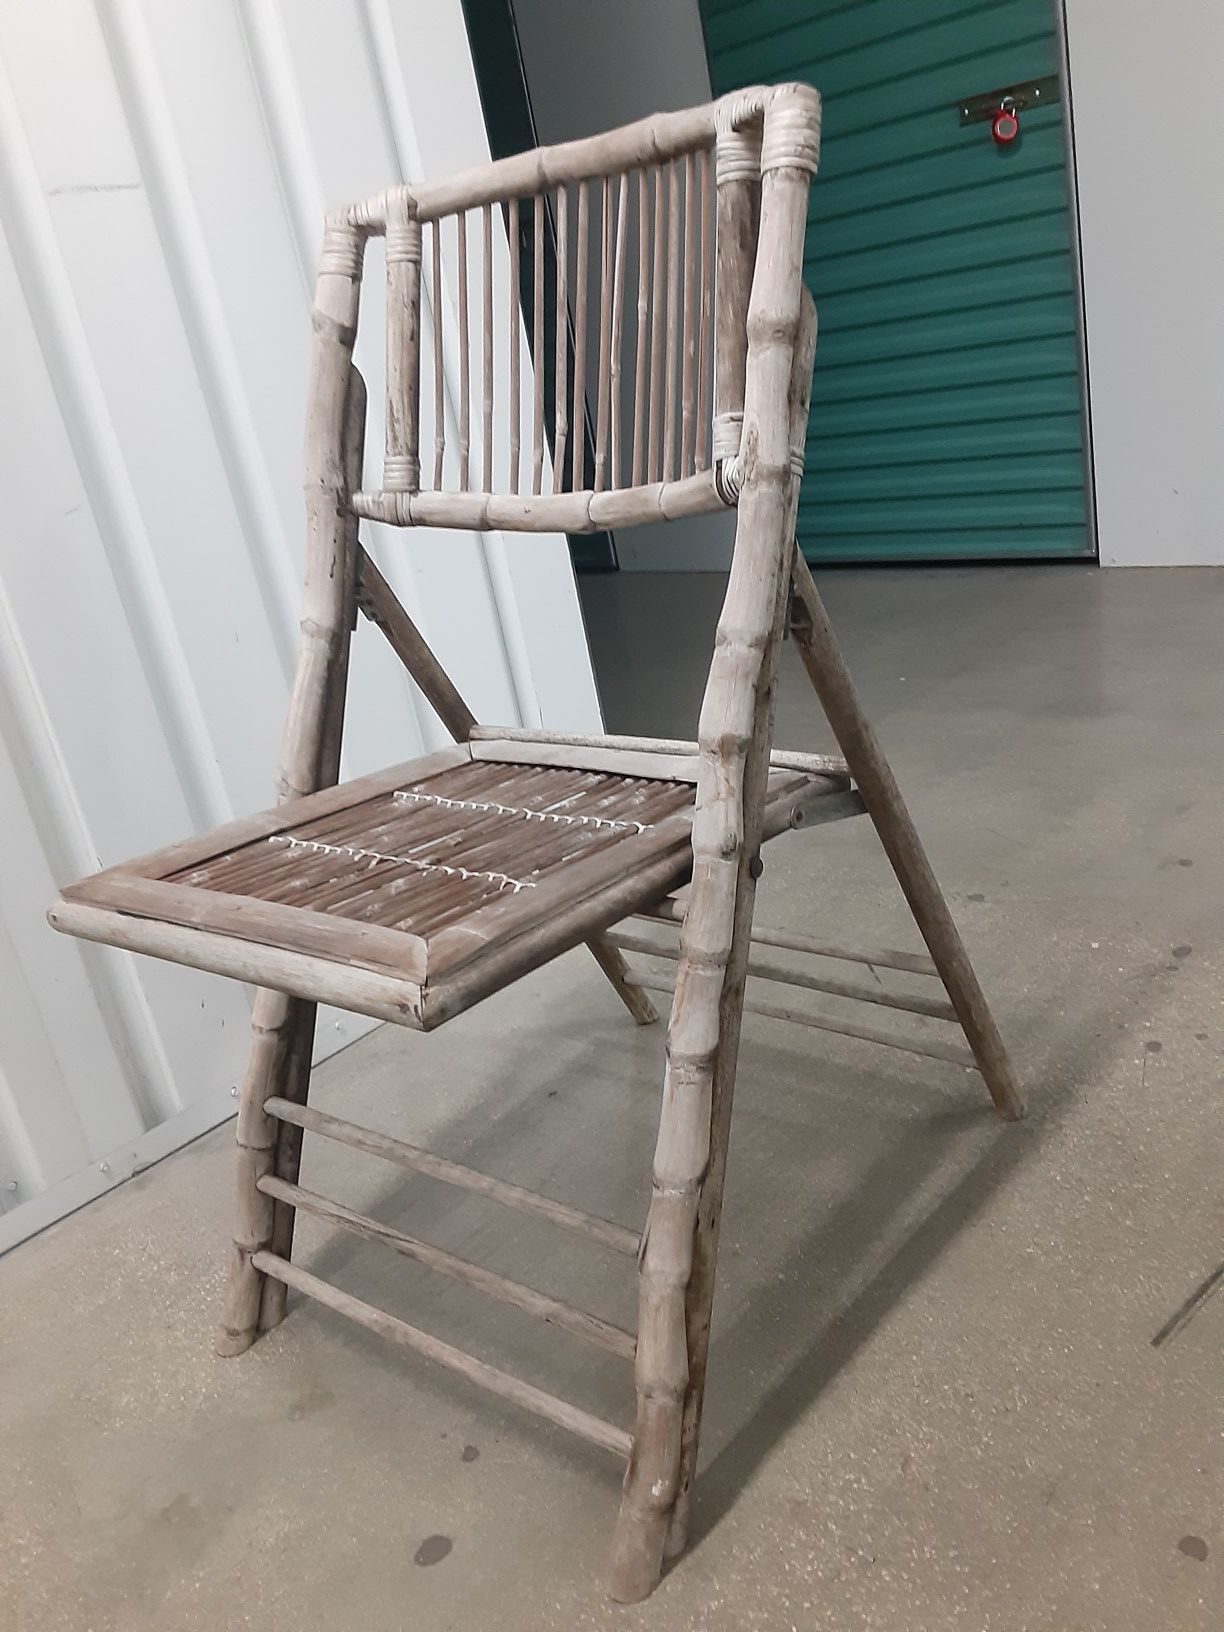 Antique washed wood folding chair